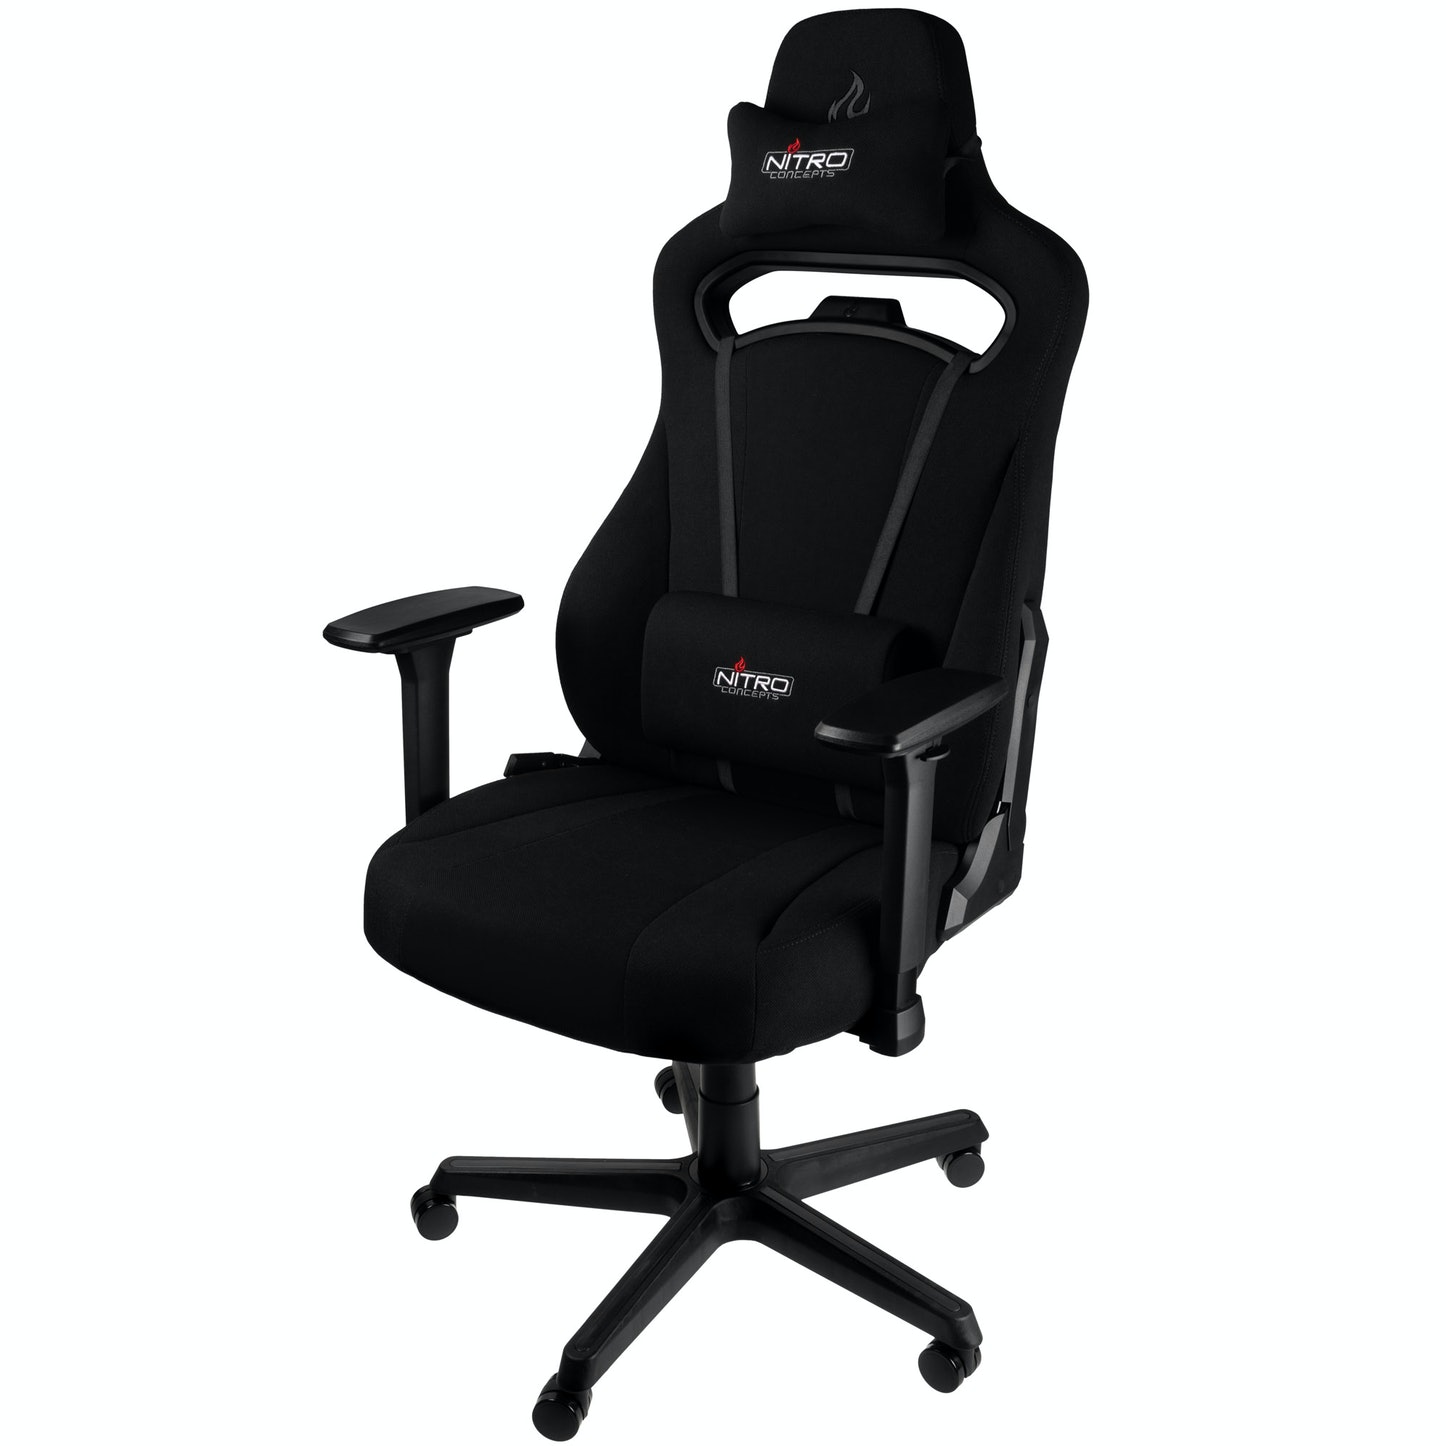 Nitro Concepts E250 Gaming Chair - Quality Fabric & Cold Foam - Stealth Black - Pro GamersWare 2.35.63.02.018